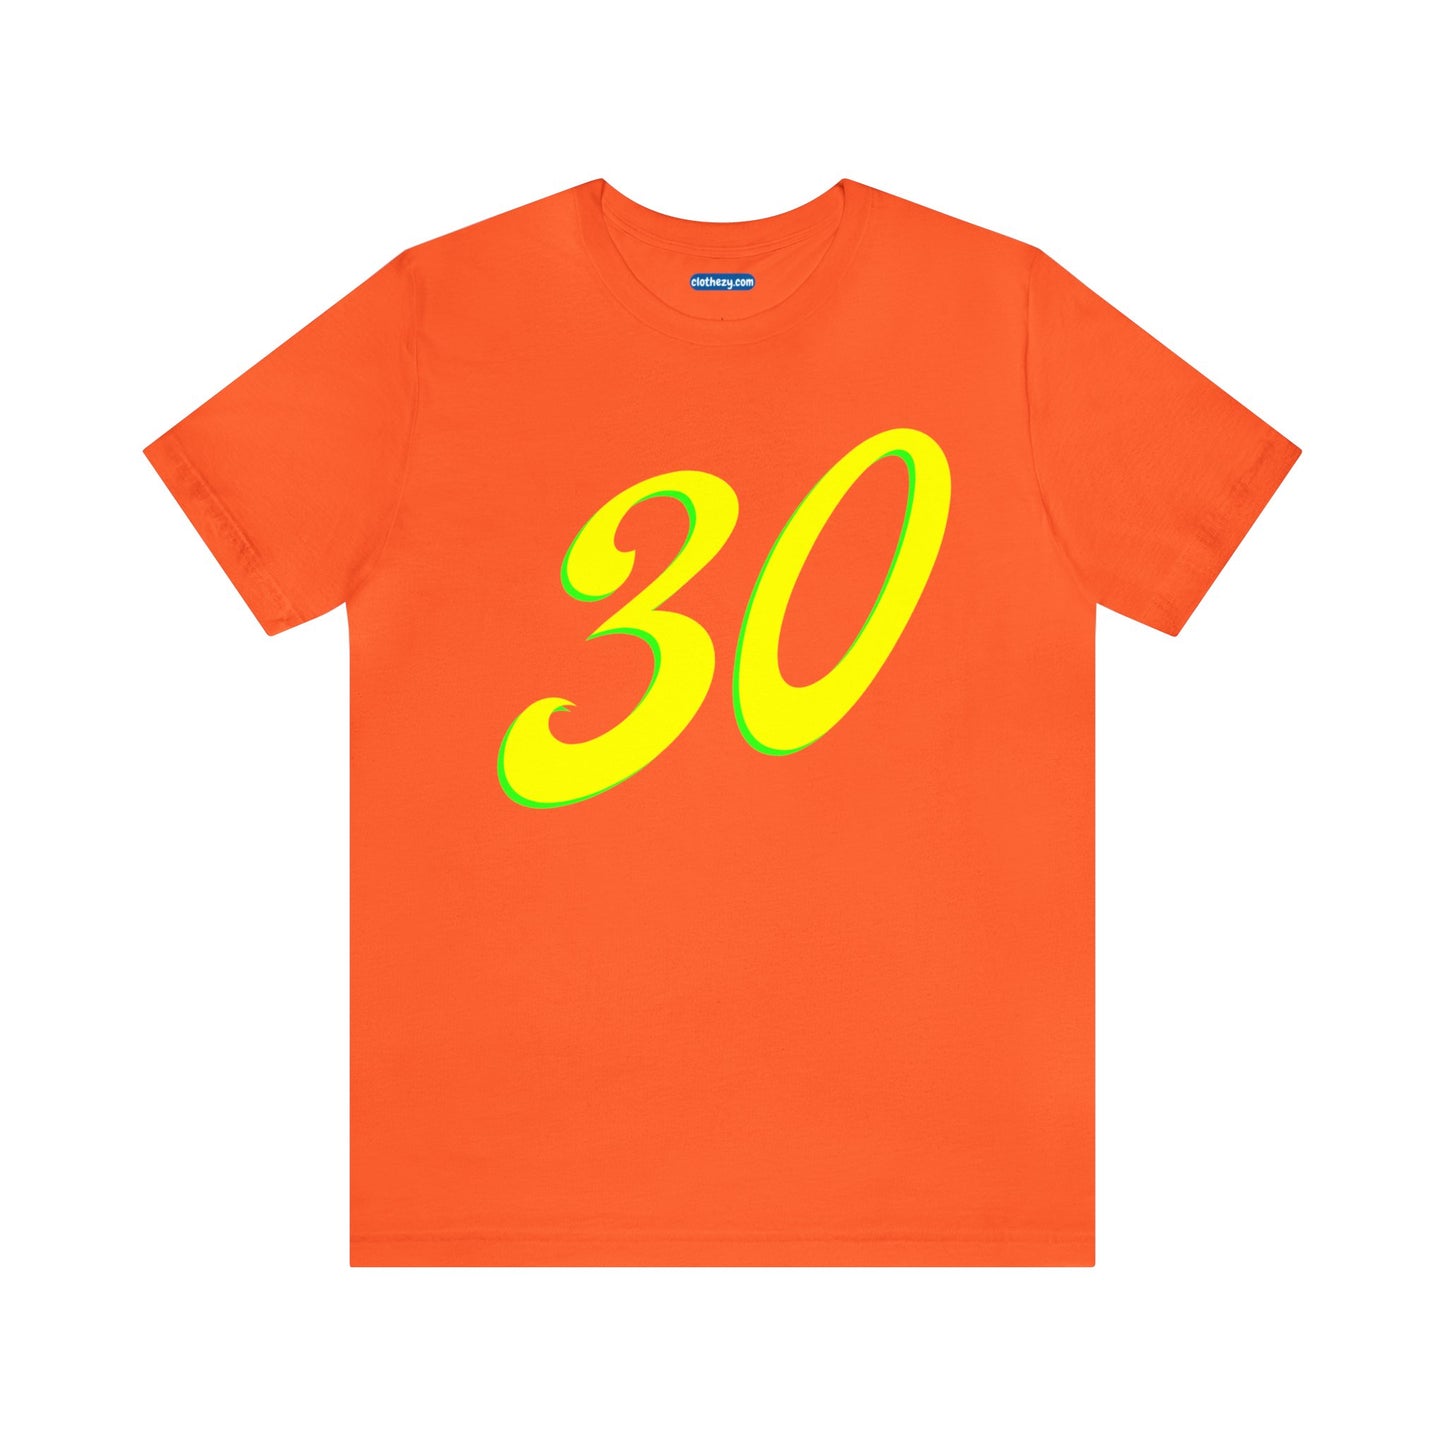 Number 30 Design - Soft Cotton Tee for birthdays and celebrations, Gift for friends and family, Multiple Options by clothezy.com in Orange Size Small - Buy Now